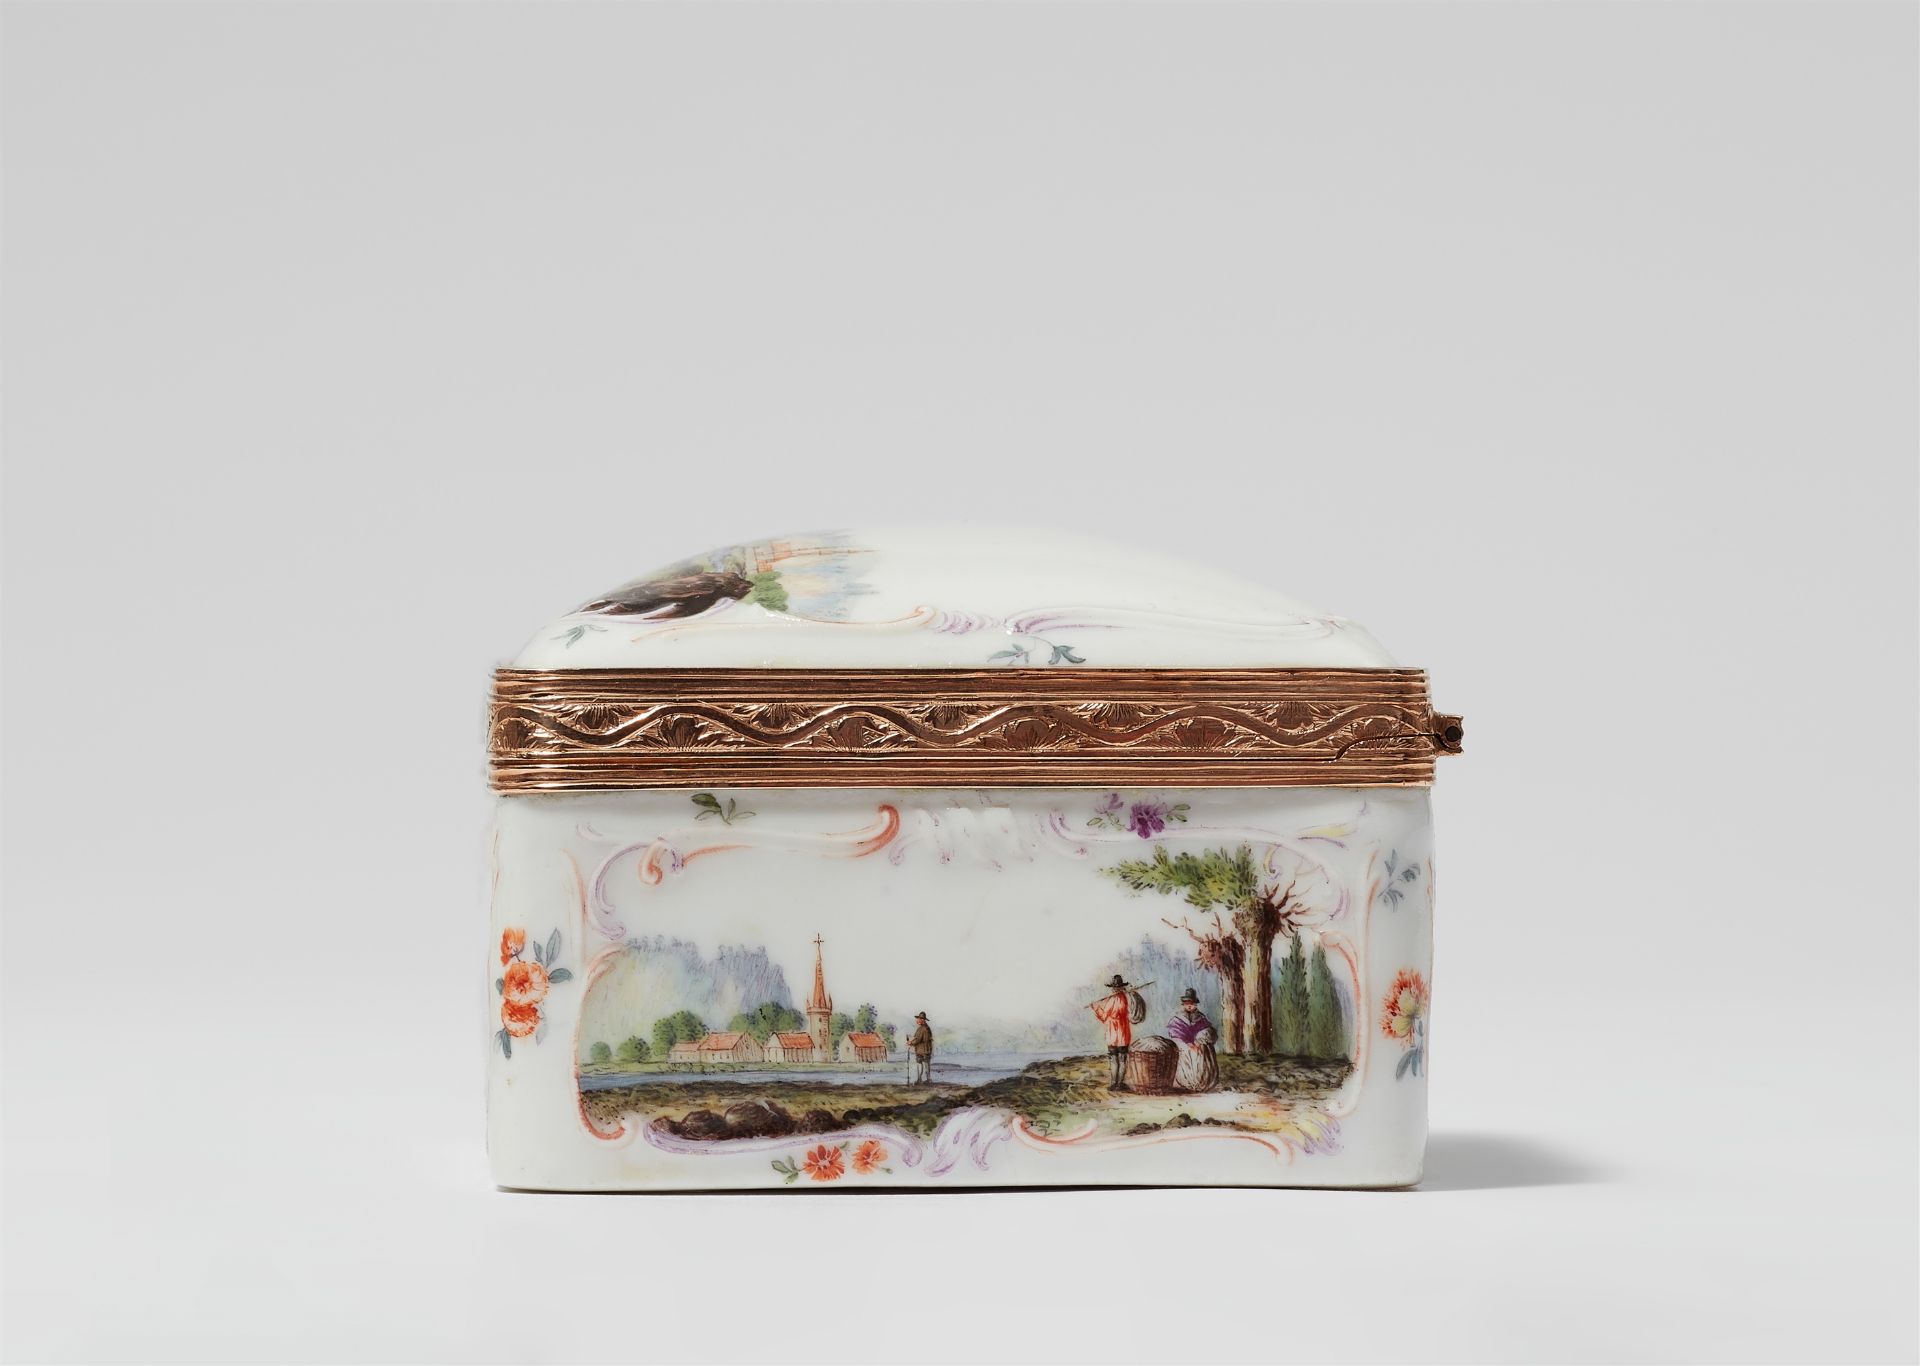 A Meissen porcelain snuff box with landscapes - Image 5 of 9